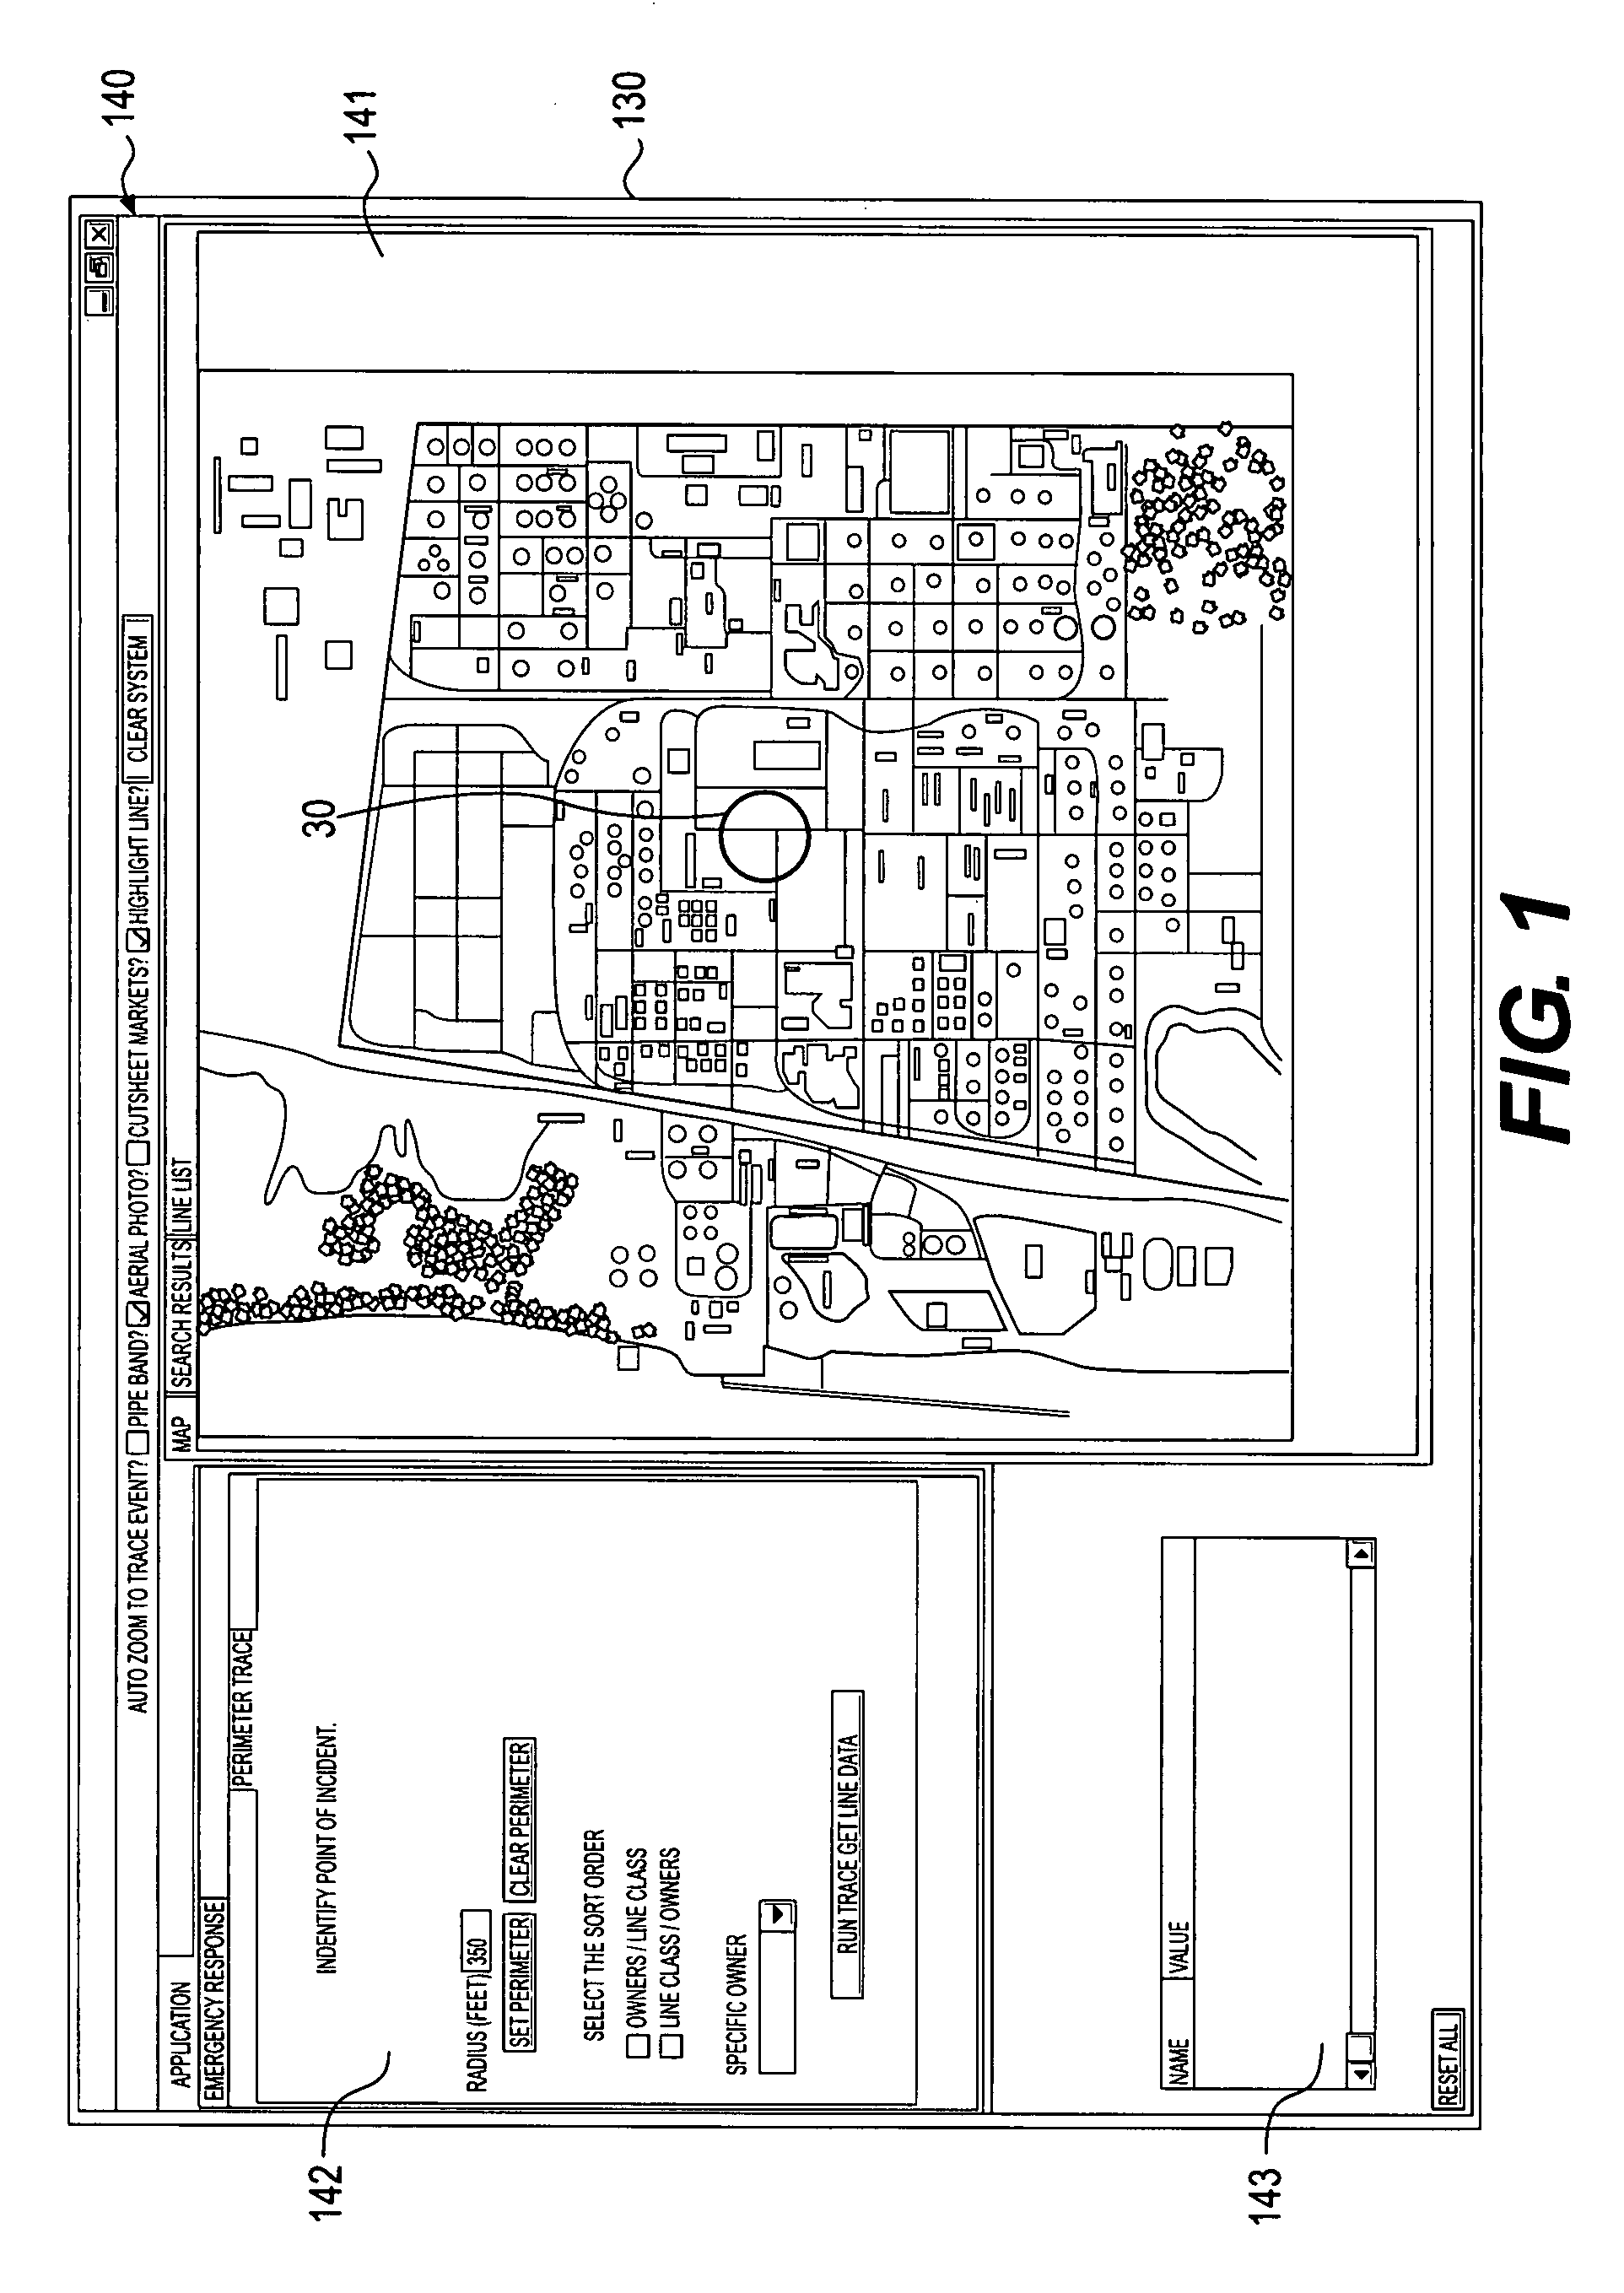 Process for mapping off-site piping systems in a refinery and/or petrochemical facility and a system for providing emergency isolation and response in a refinery and/or petrochemical facility